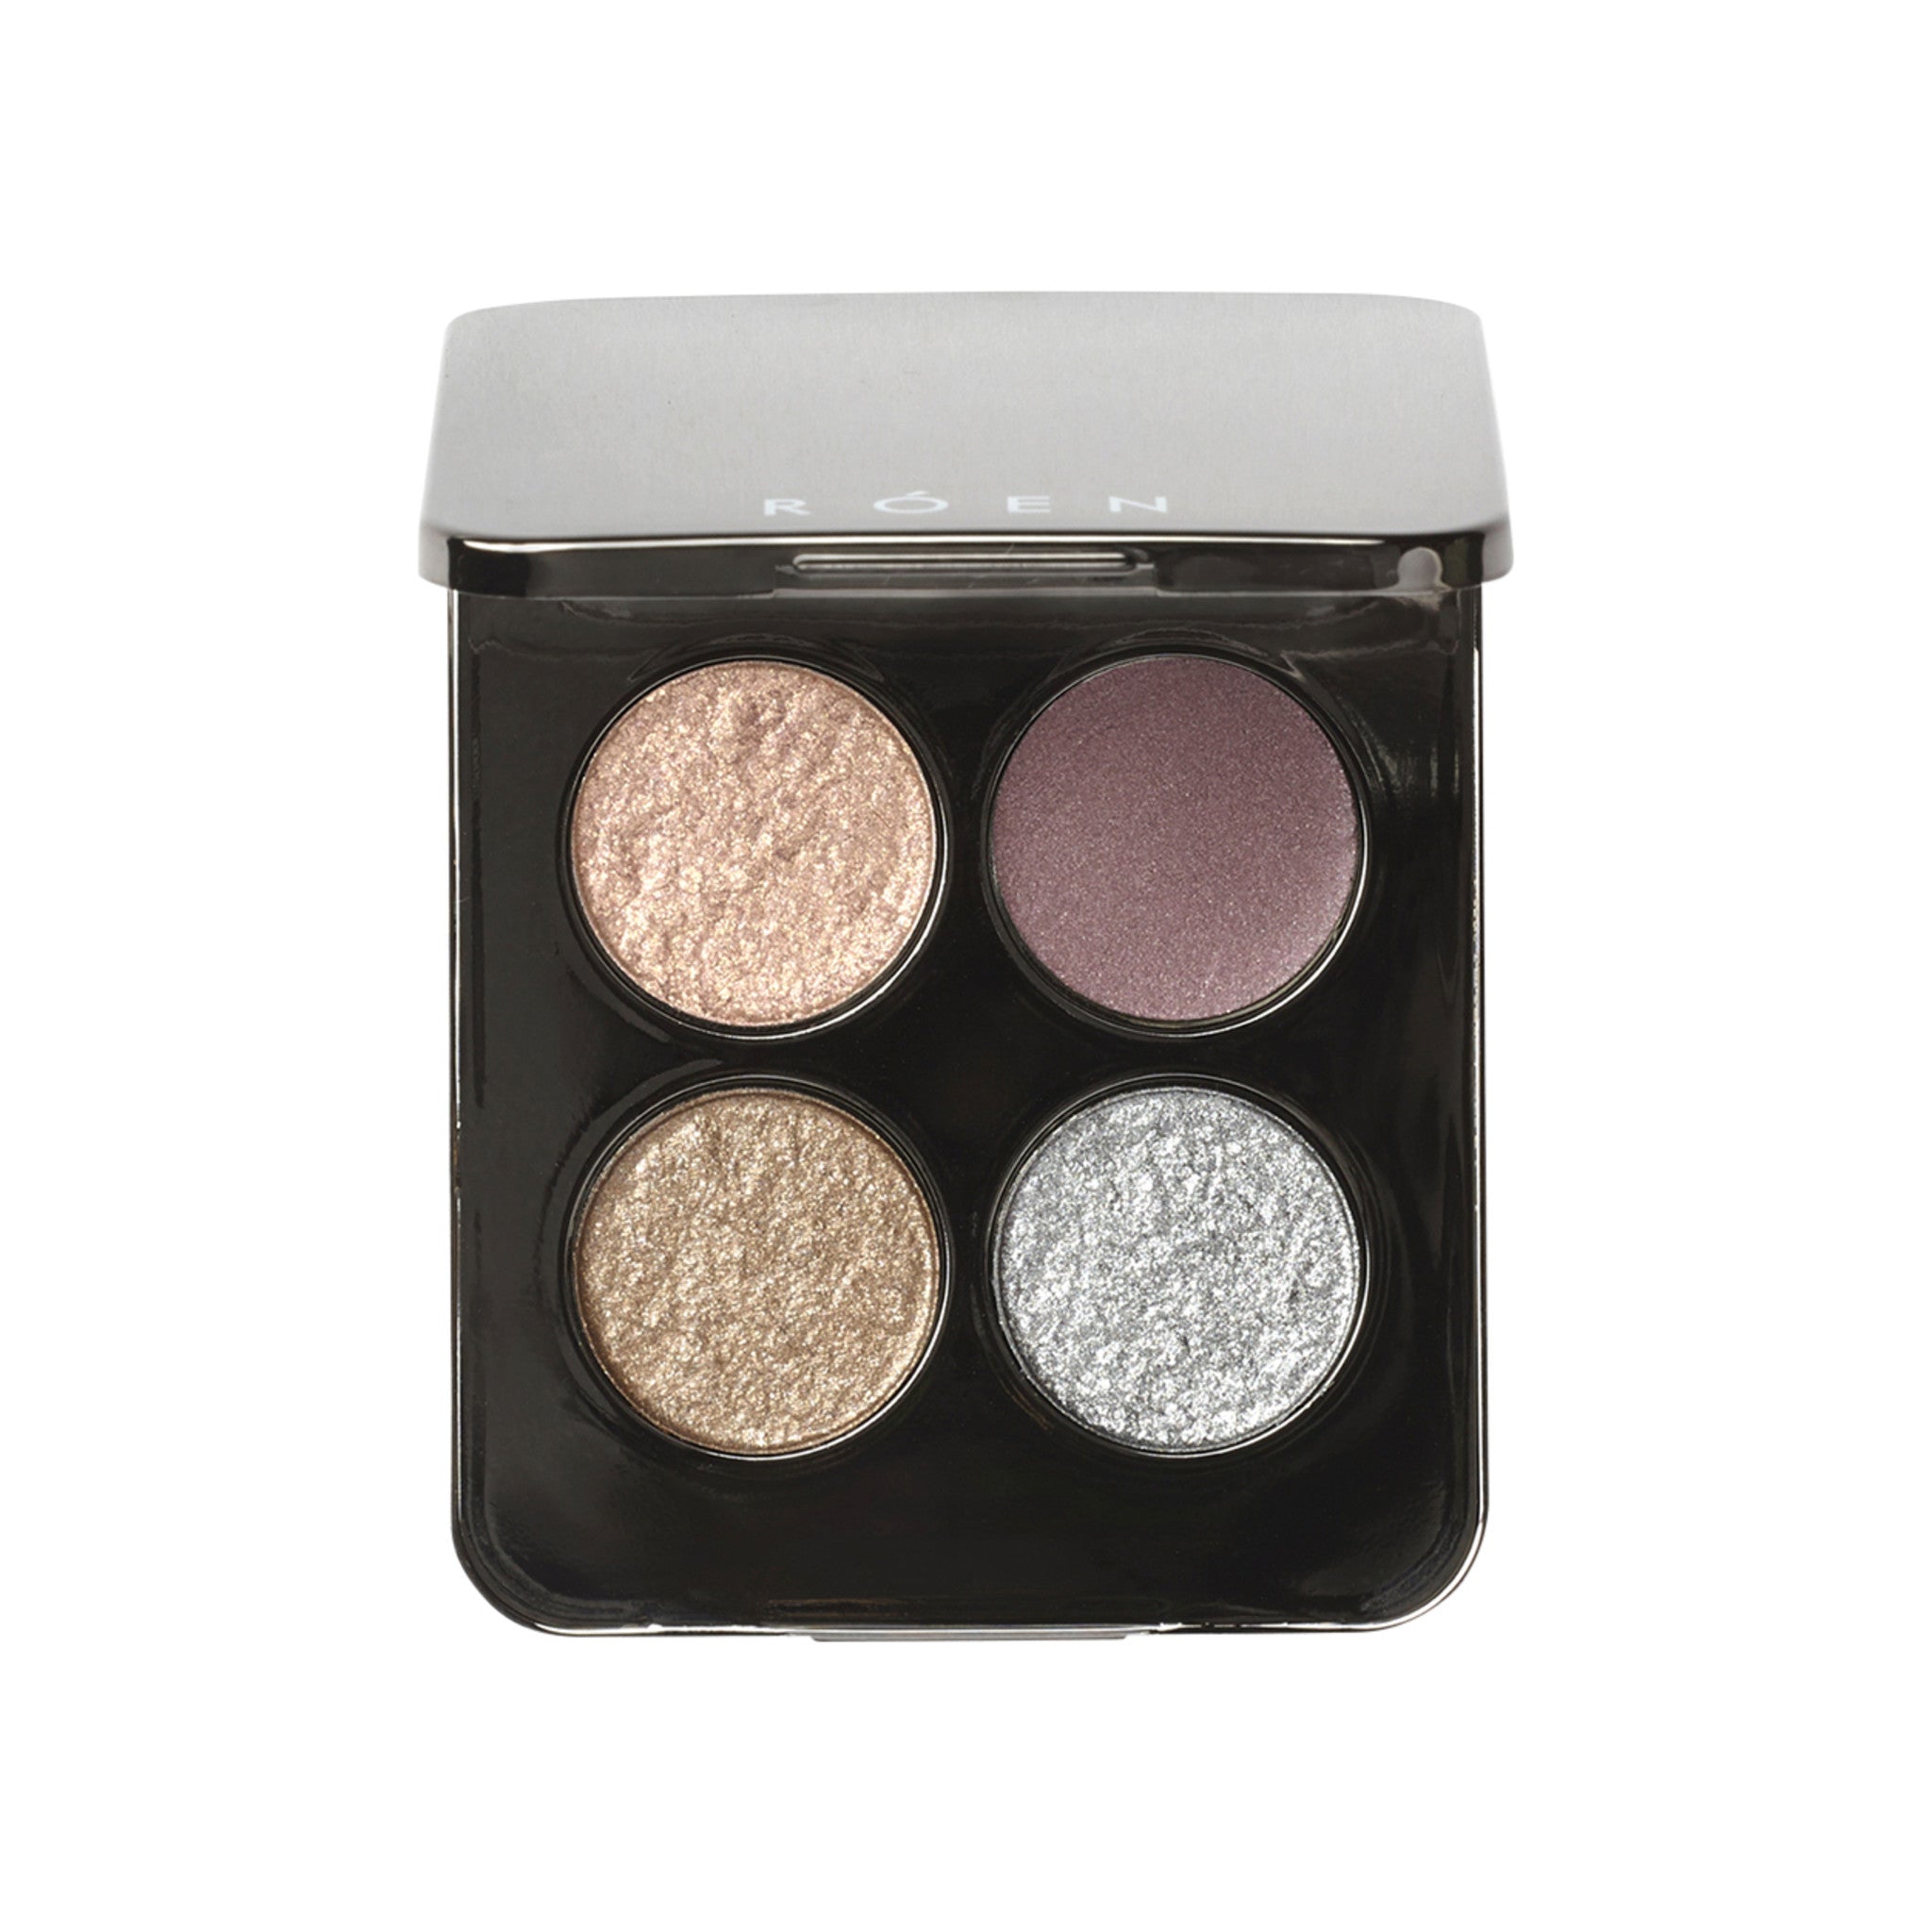 Róen 52° Cool Eye Shadow Palette main image. This product is in the color multi